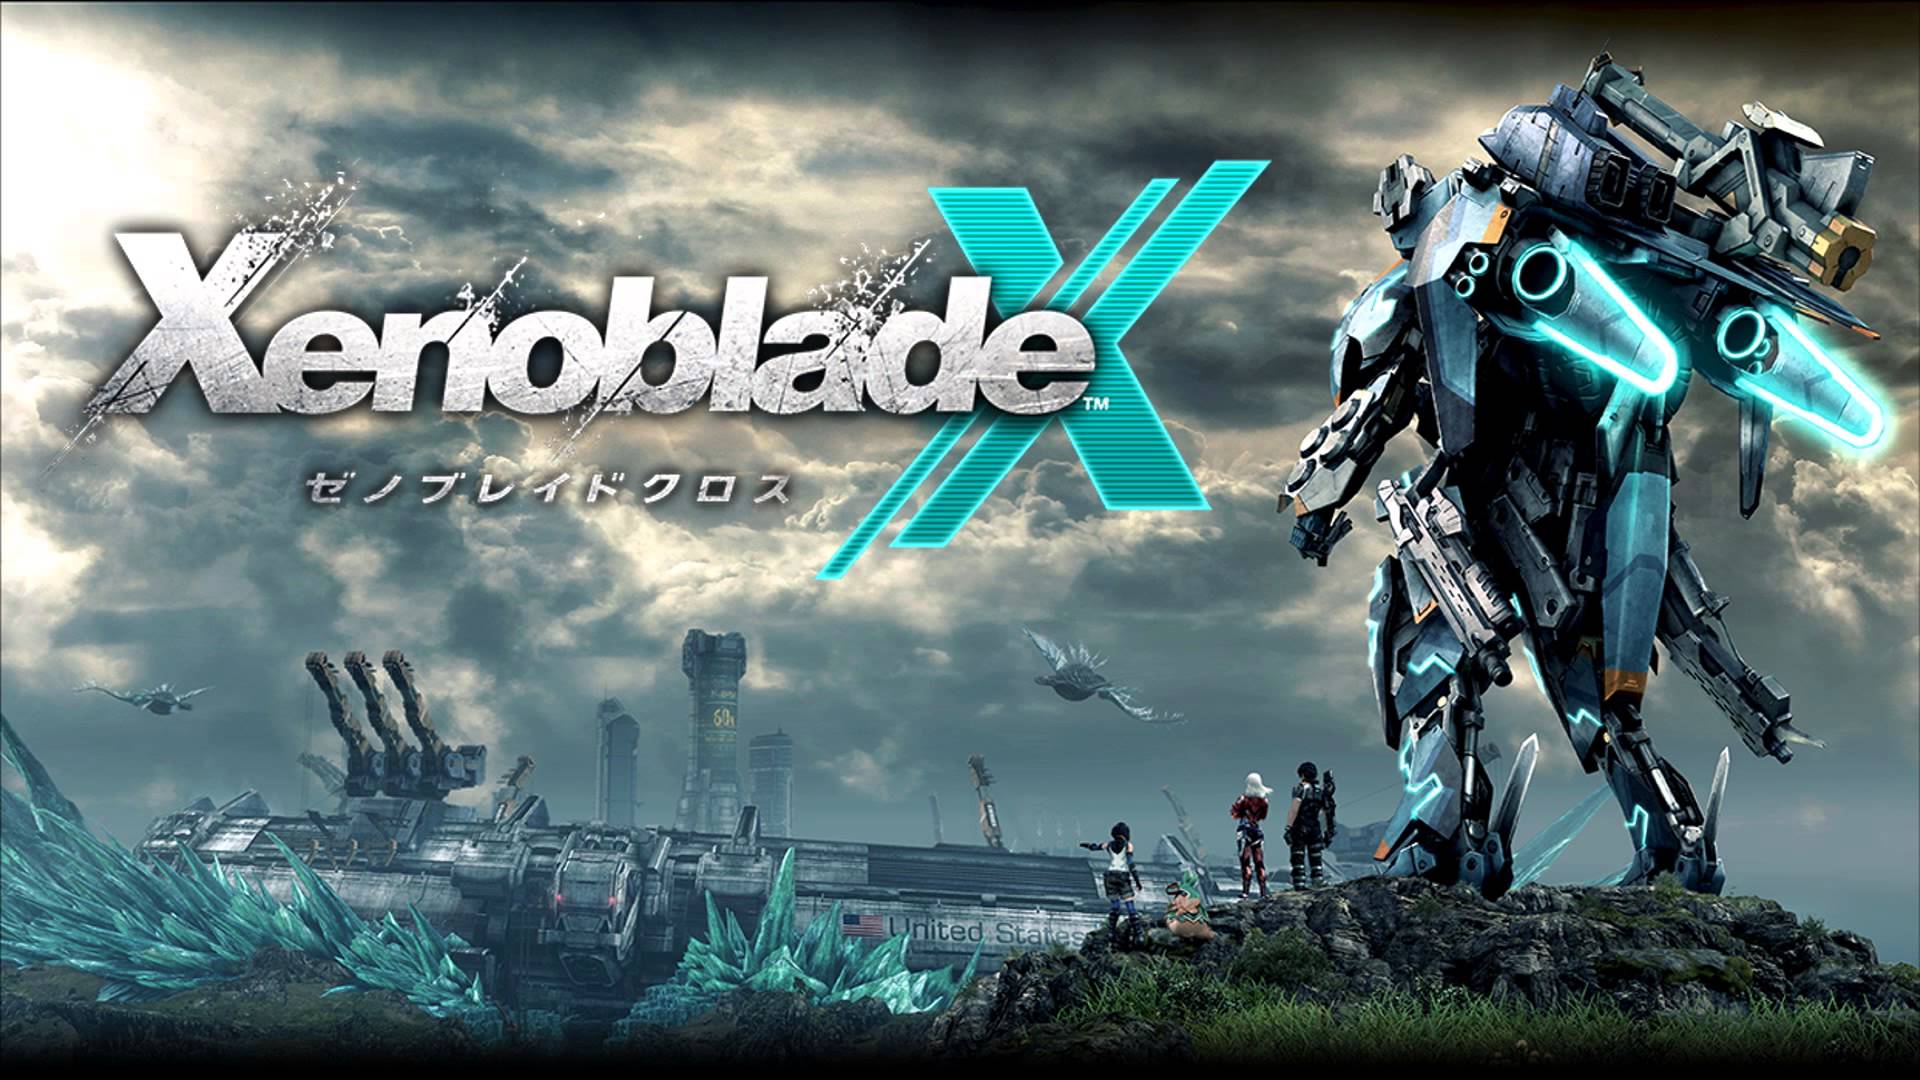 “Xenoblade Chronicles X” Direct Information - Details on Planet Mira and What Lives On It